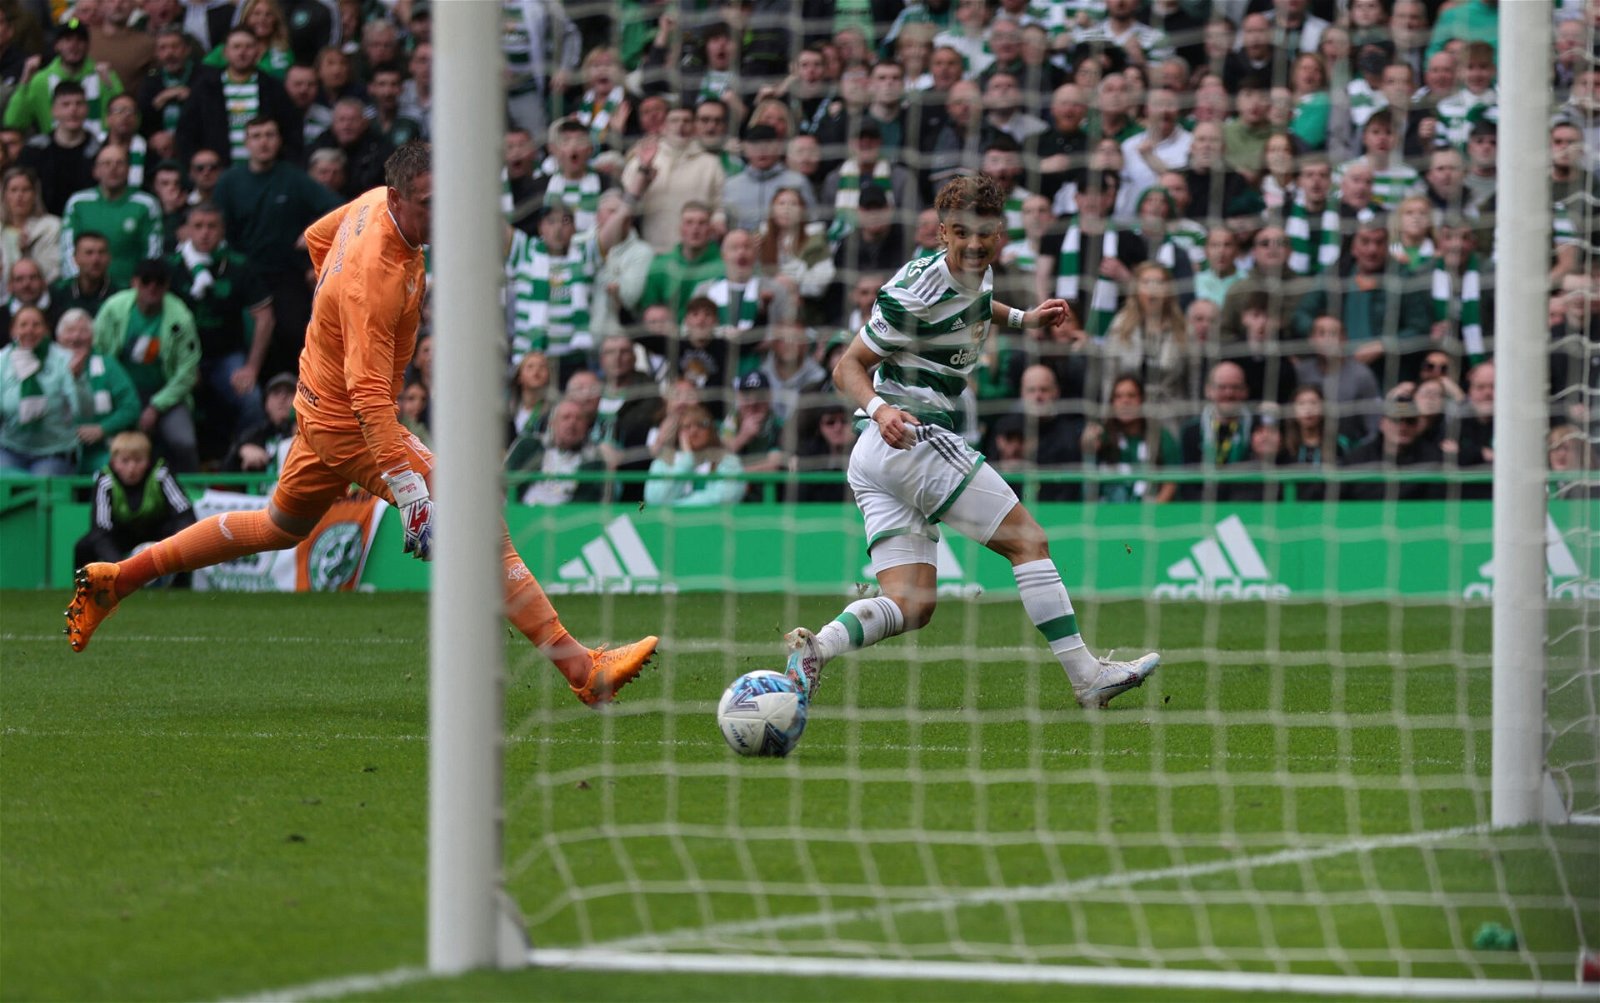 Video Unseen Footage As Allan Mcgregor Taunted By Celtic Ball Bhoys Latest Celtic News 